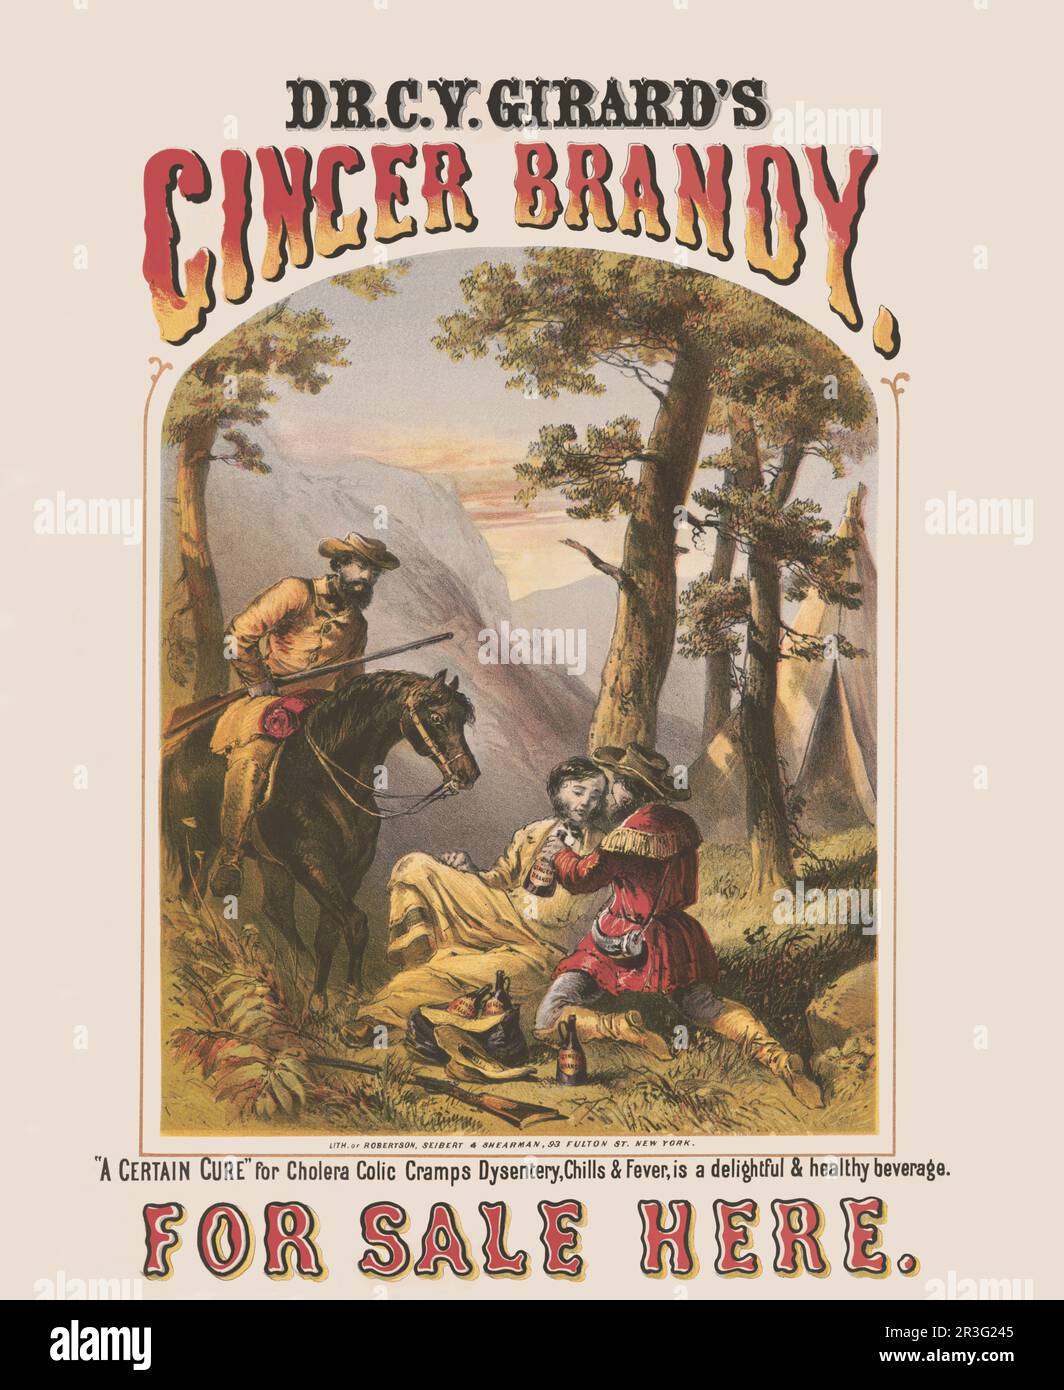 Two frontiersmen giving some of ginger brandy to a sick man leaning against a tree. Stock Photo